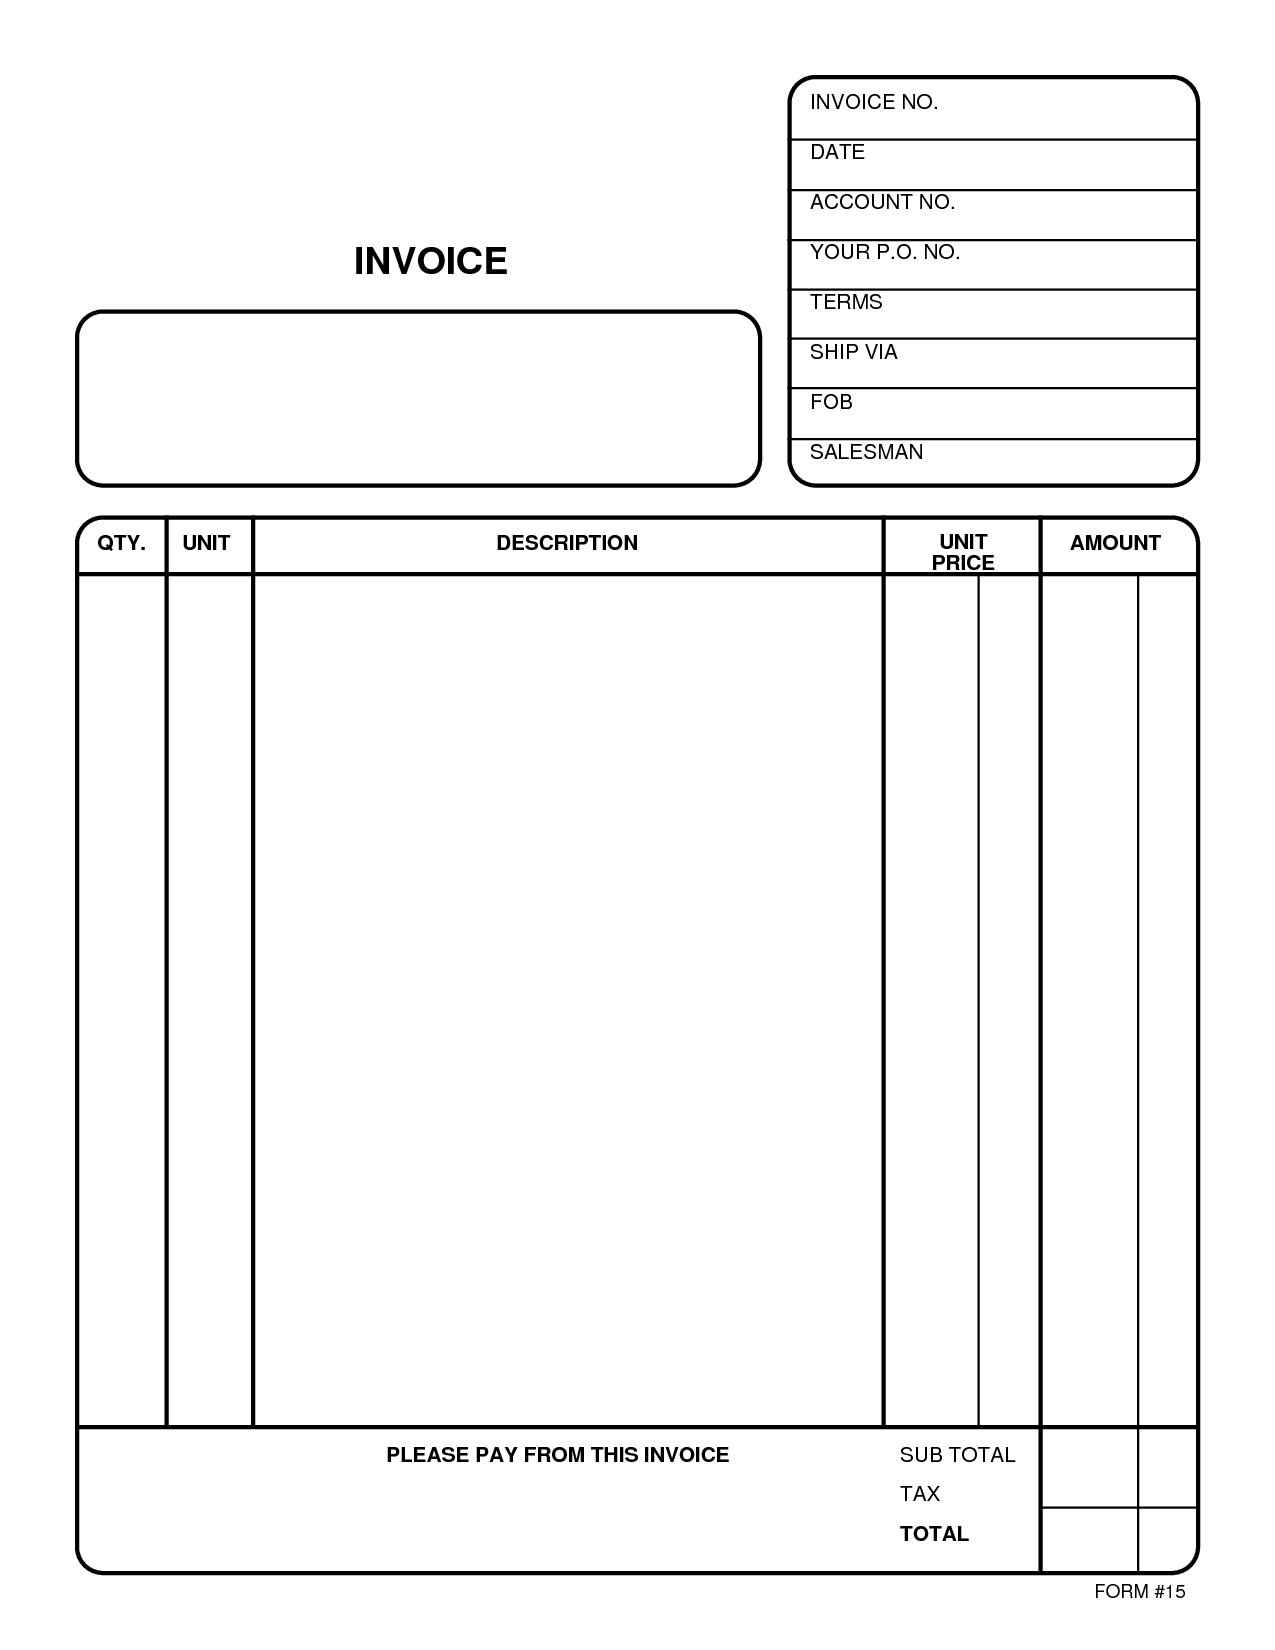 online invoices template invoice template free 2016 free online invoice templates